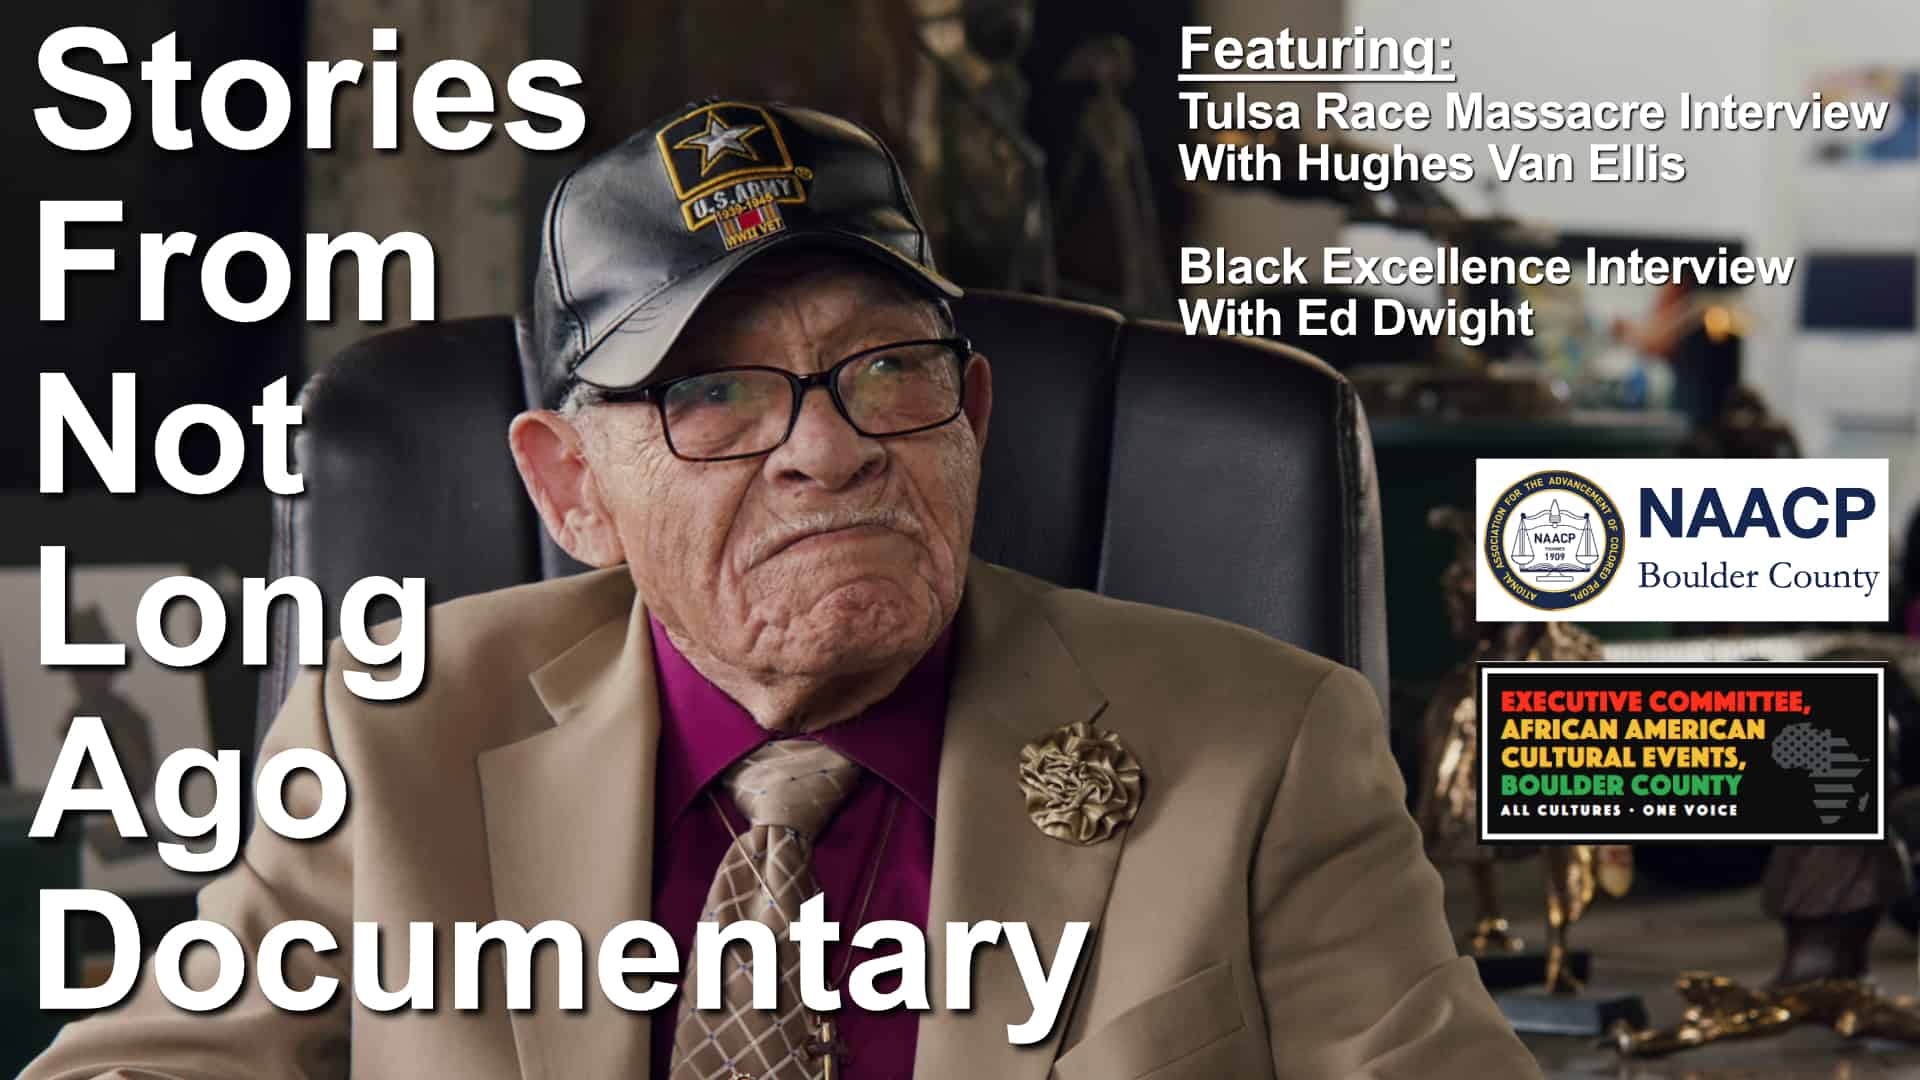 Stories From Not Long Ago Documentary Thumbnail Featuring and Picture of Hughes Van Ellis